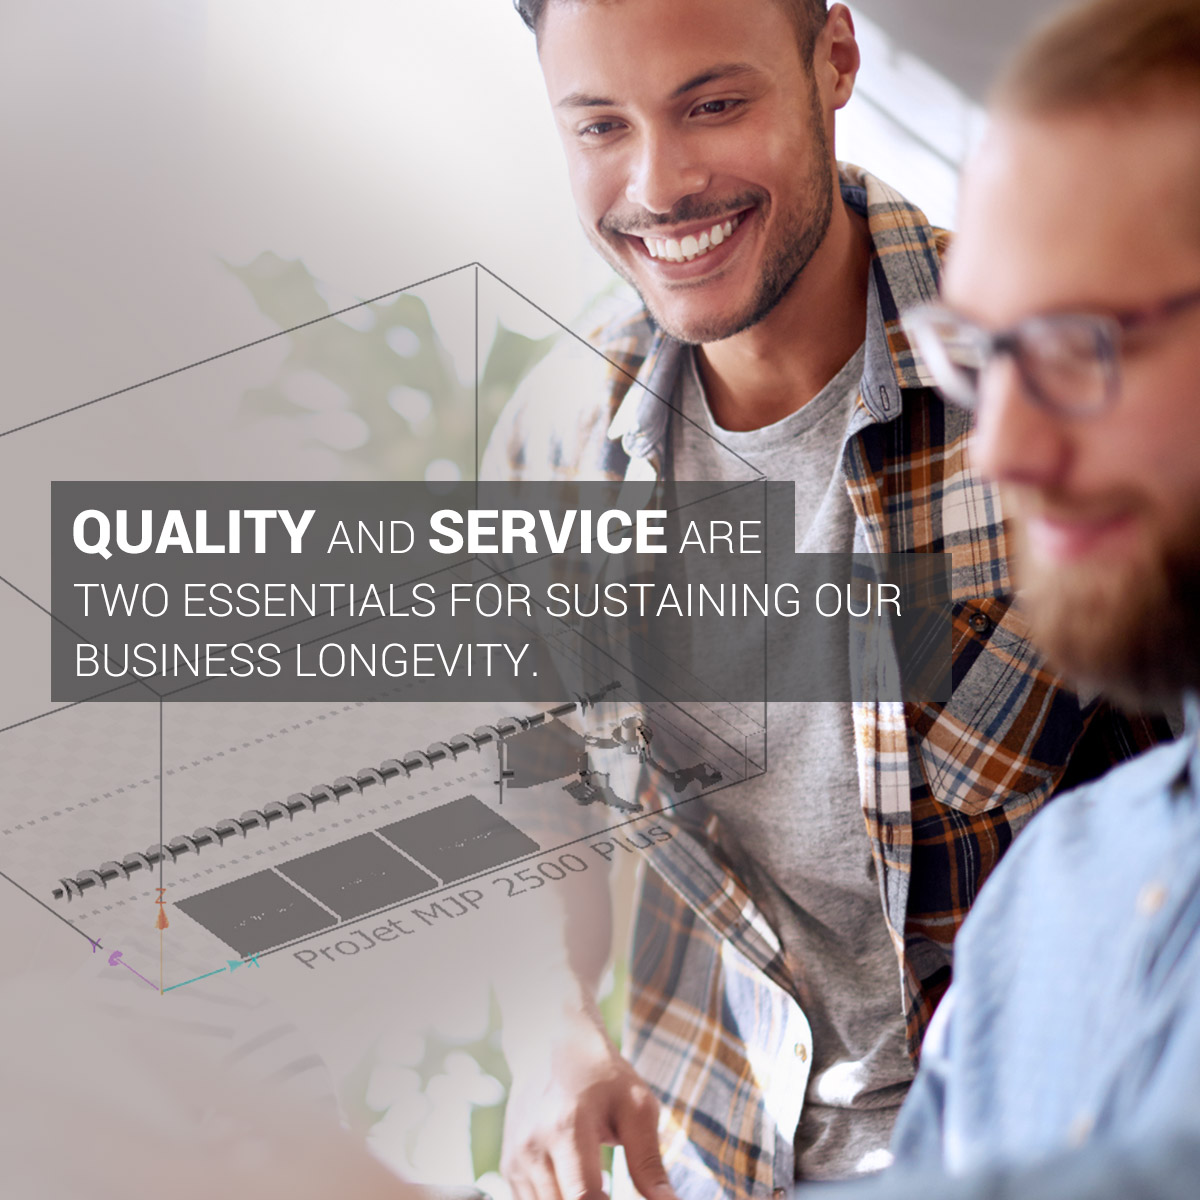 Quality and Service are two essentials for sustaining our business longevity